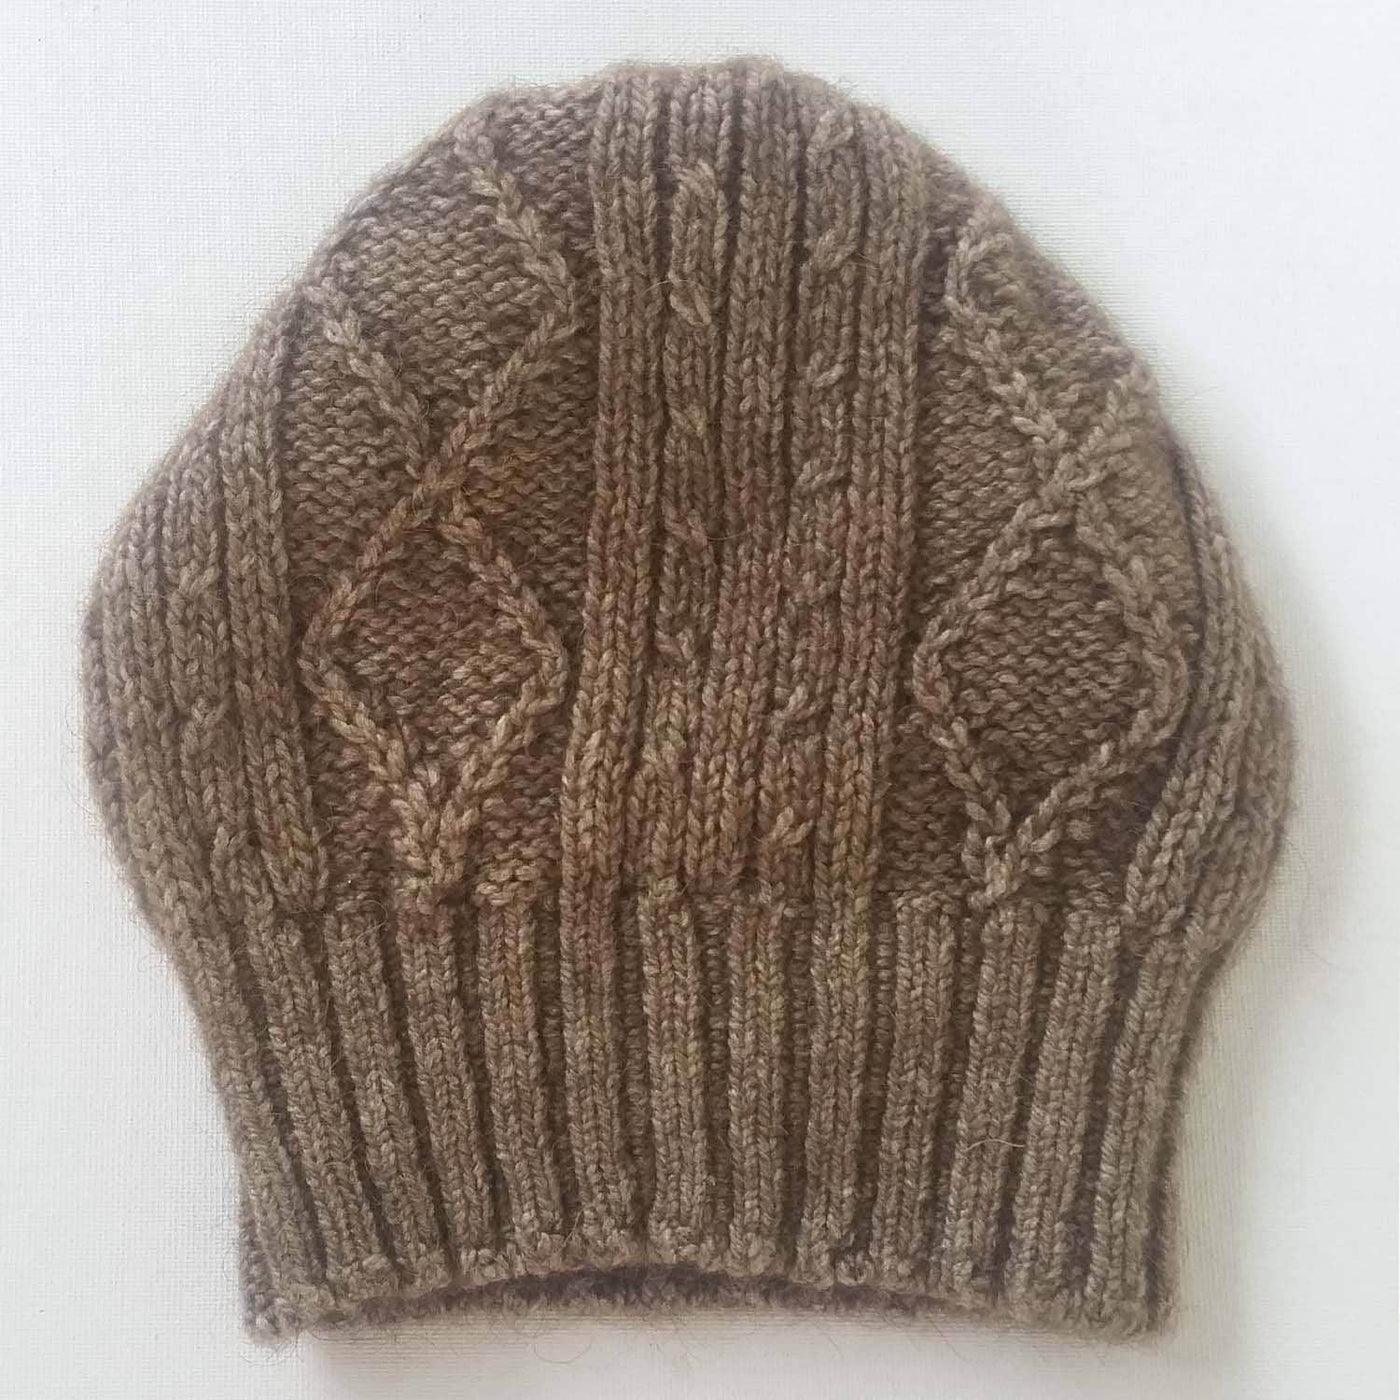 Diamond cabled knitted hat - Bison & Muga Silk Bison Gear The Buffalo Wool Co. Natural 